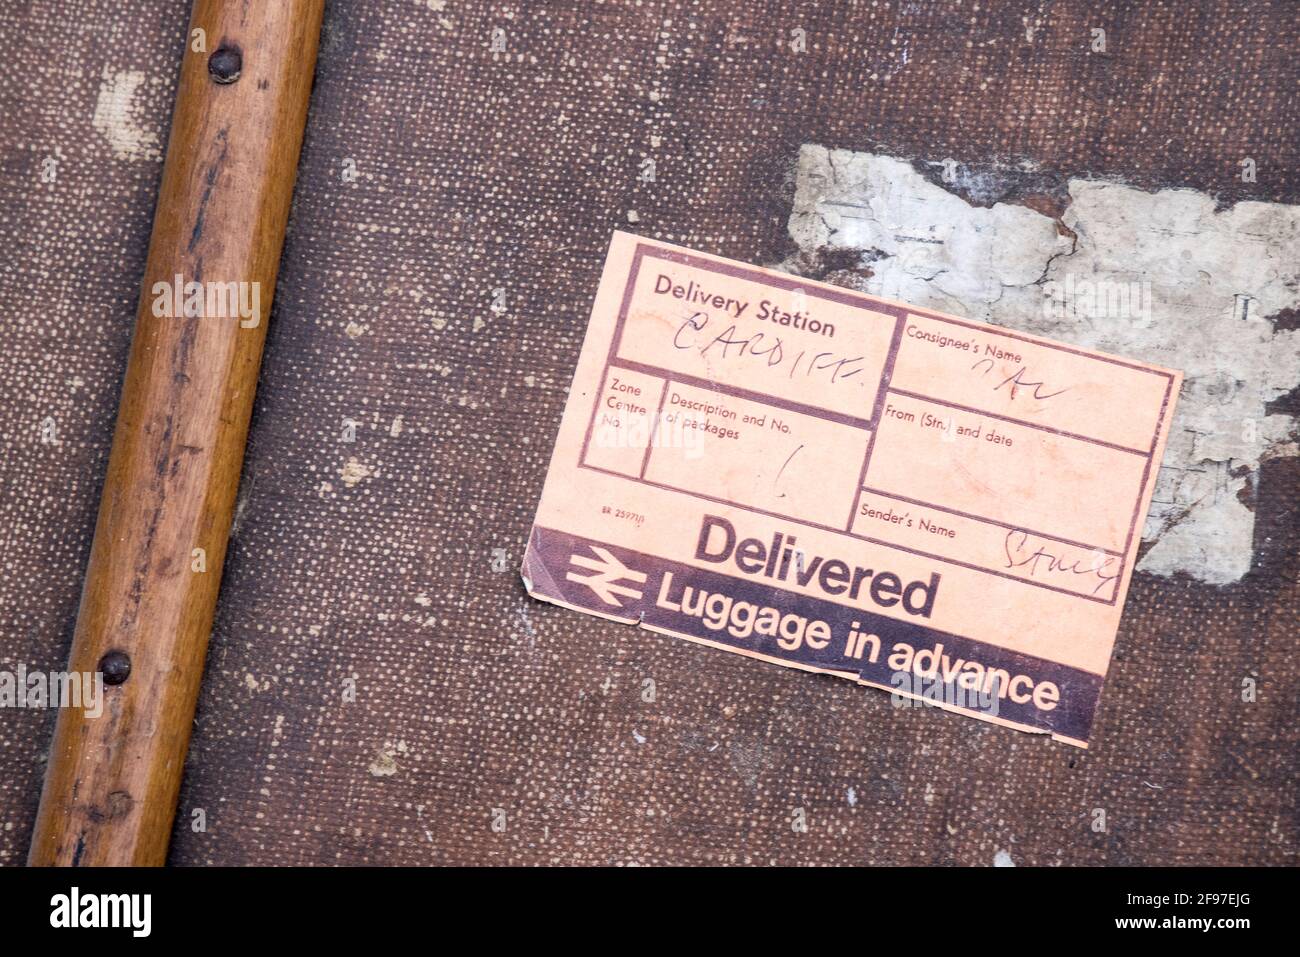 Luggage in advance sticker on classic luggage trunk that has been used for rail delivery, 1970s, UK Stock Photo